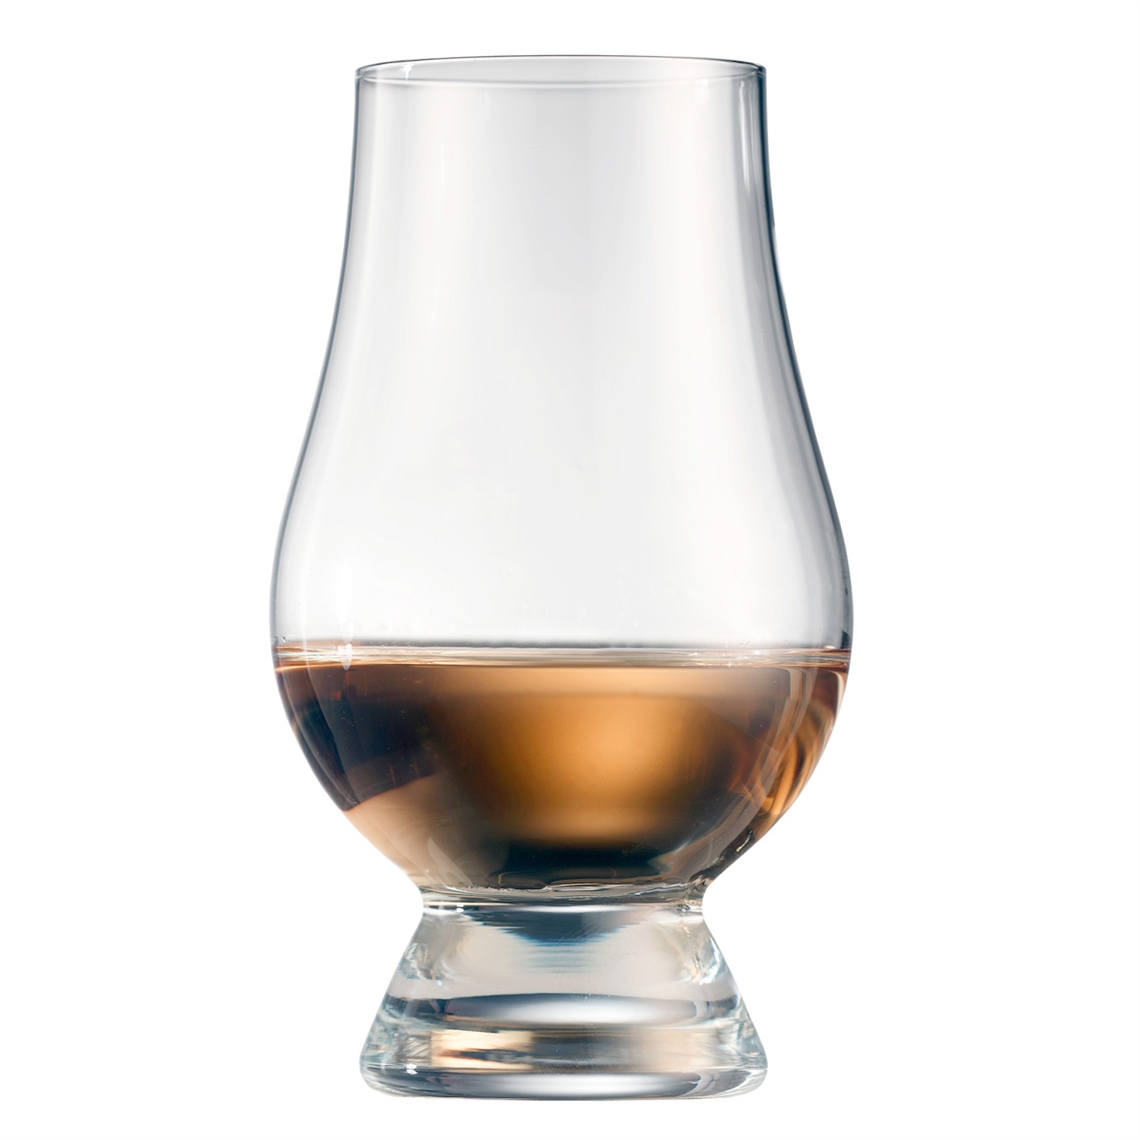 View more whisky glasses from our Whisky Glasses range